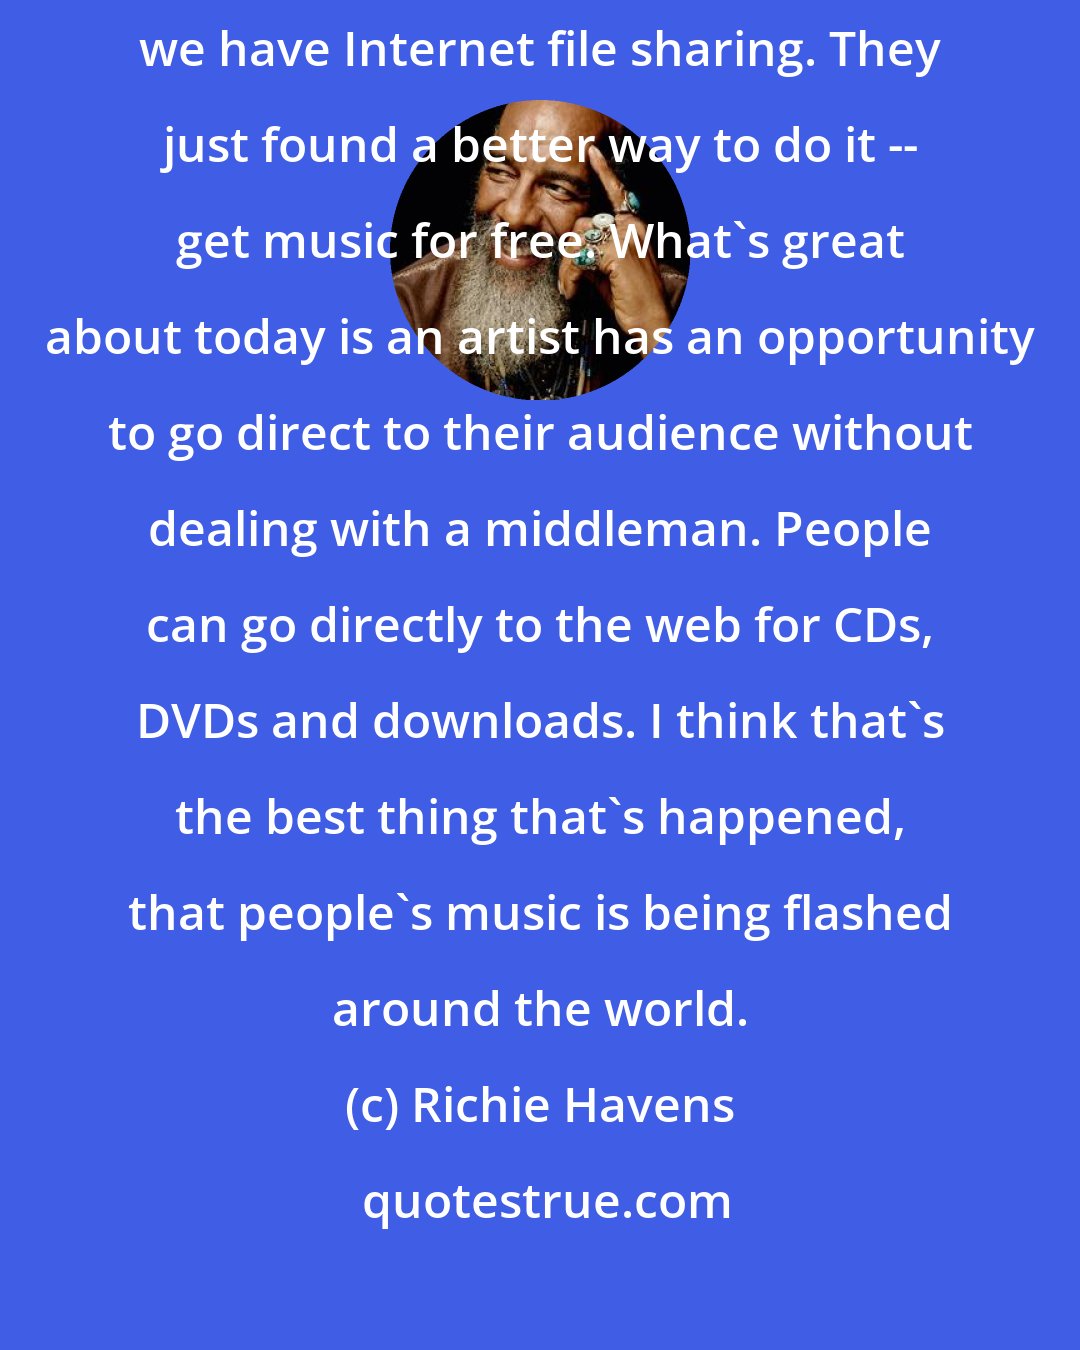 Richie Havens: Nothing has really changed. We had bootleg albums in the '60s and today we have Internet file sharing. They just found a better way to do it -- get music for free. What's great about today is an artist has an opportunity to go direct to their audience without dealing with a middleman. People can go directly to the web for CDs, DVDs and downloads. I think that's the best thing that's happened, that people's music is being flashed around the world.